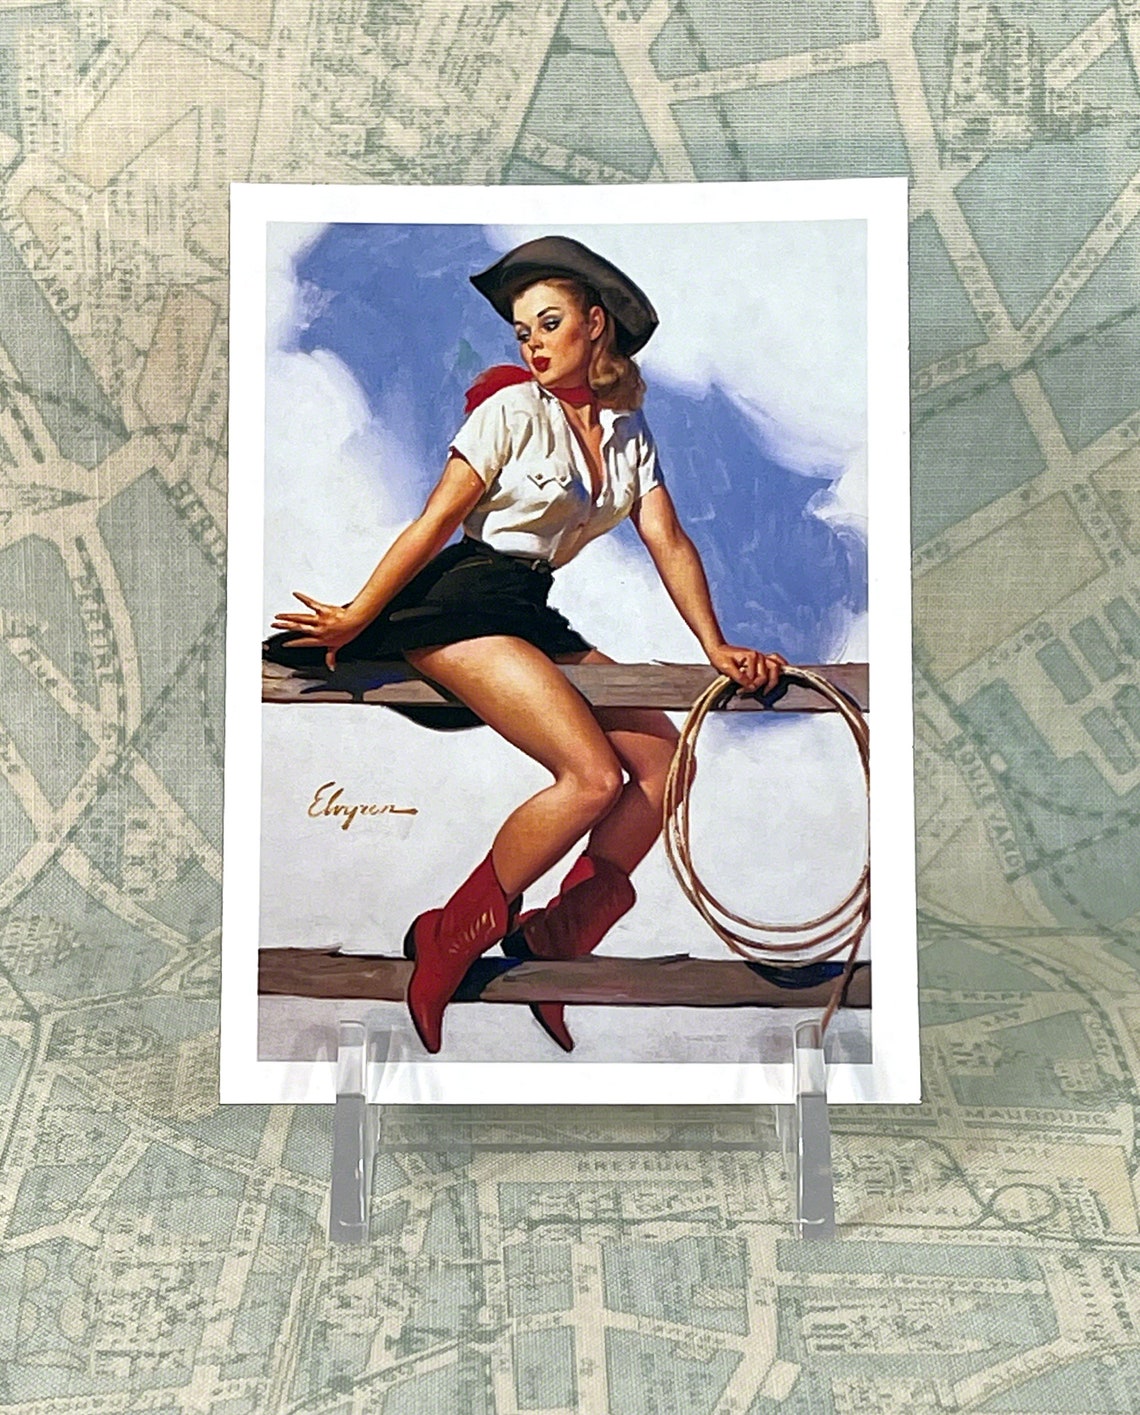 Sexy Refrigerator Magnet Cowgirl Pinup Girl Repro Gil Etsy